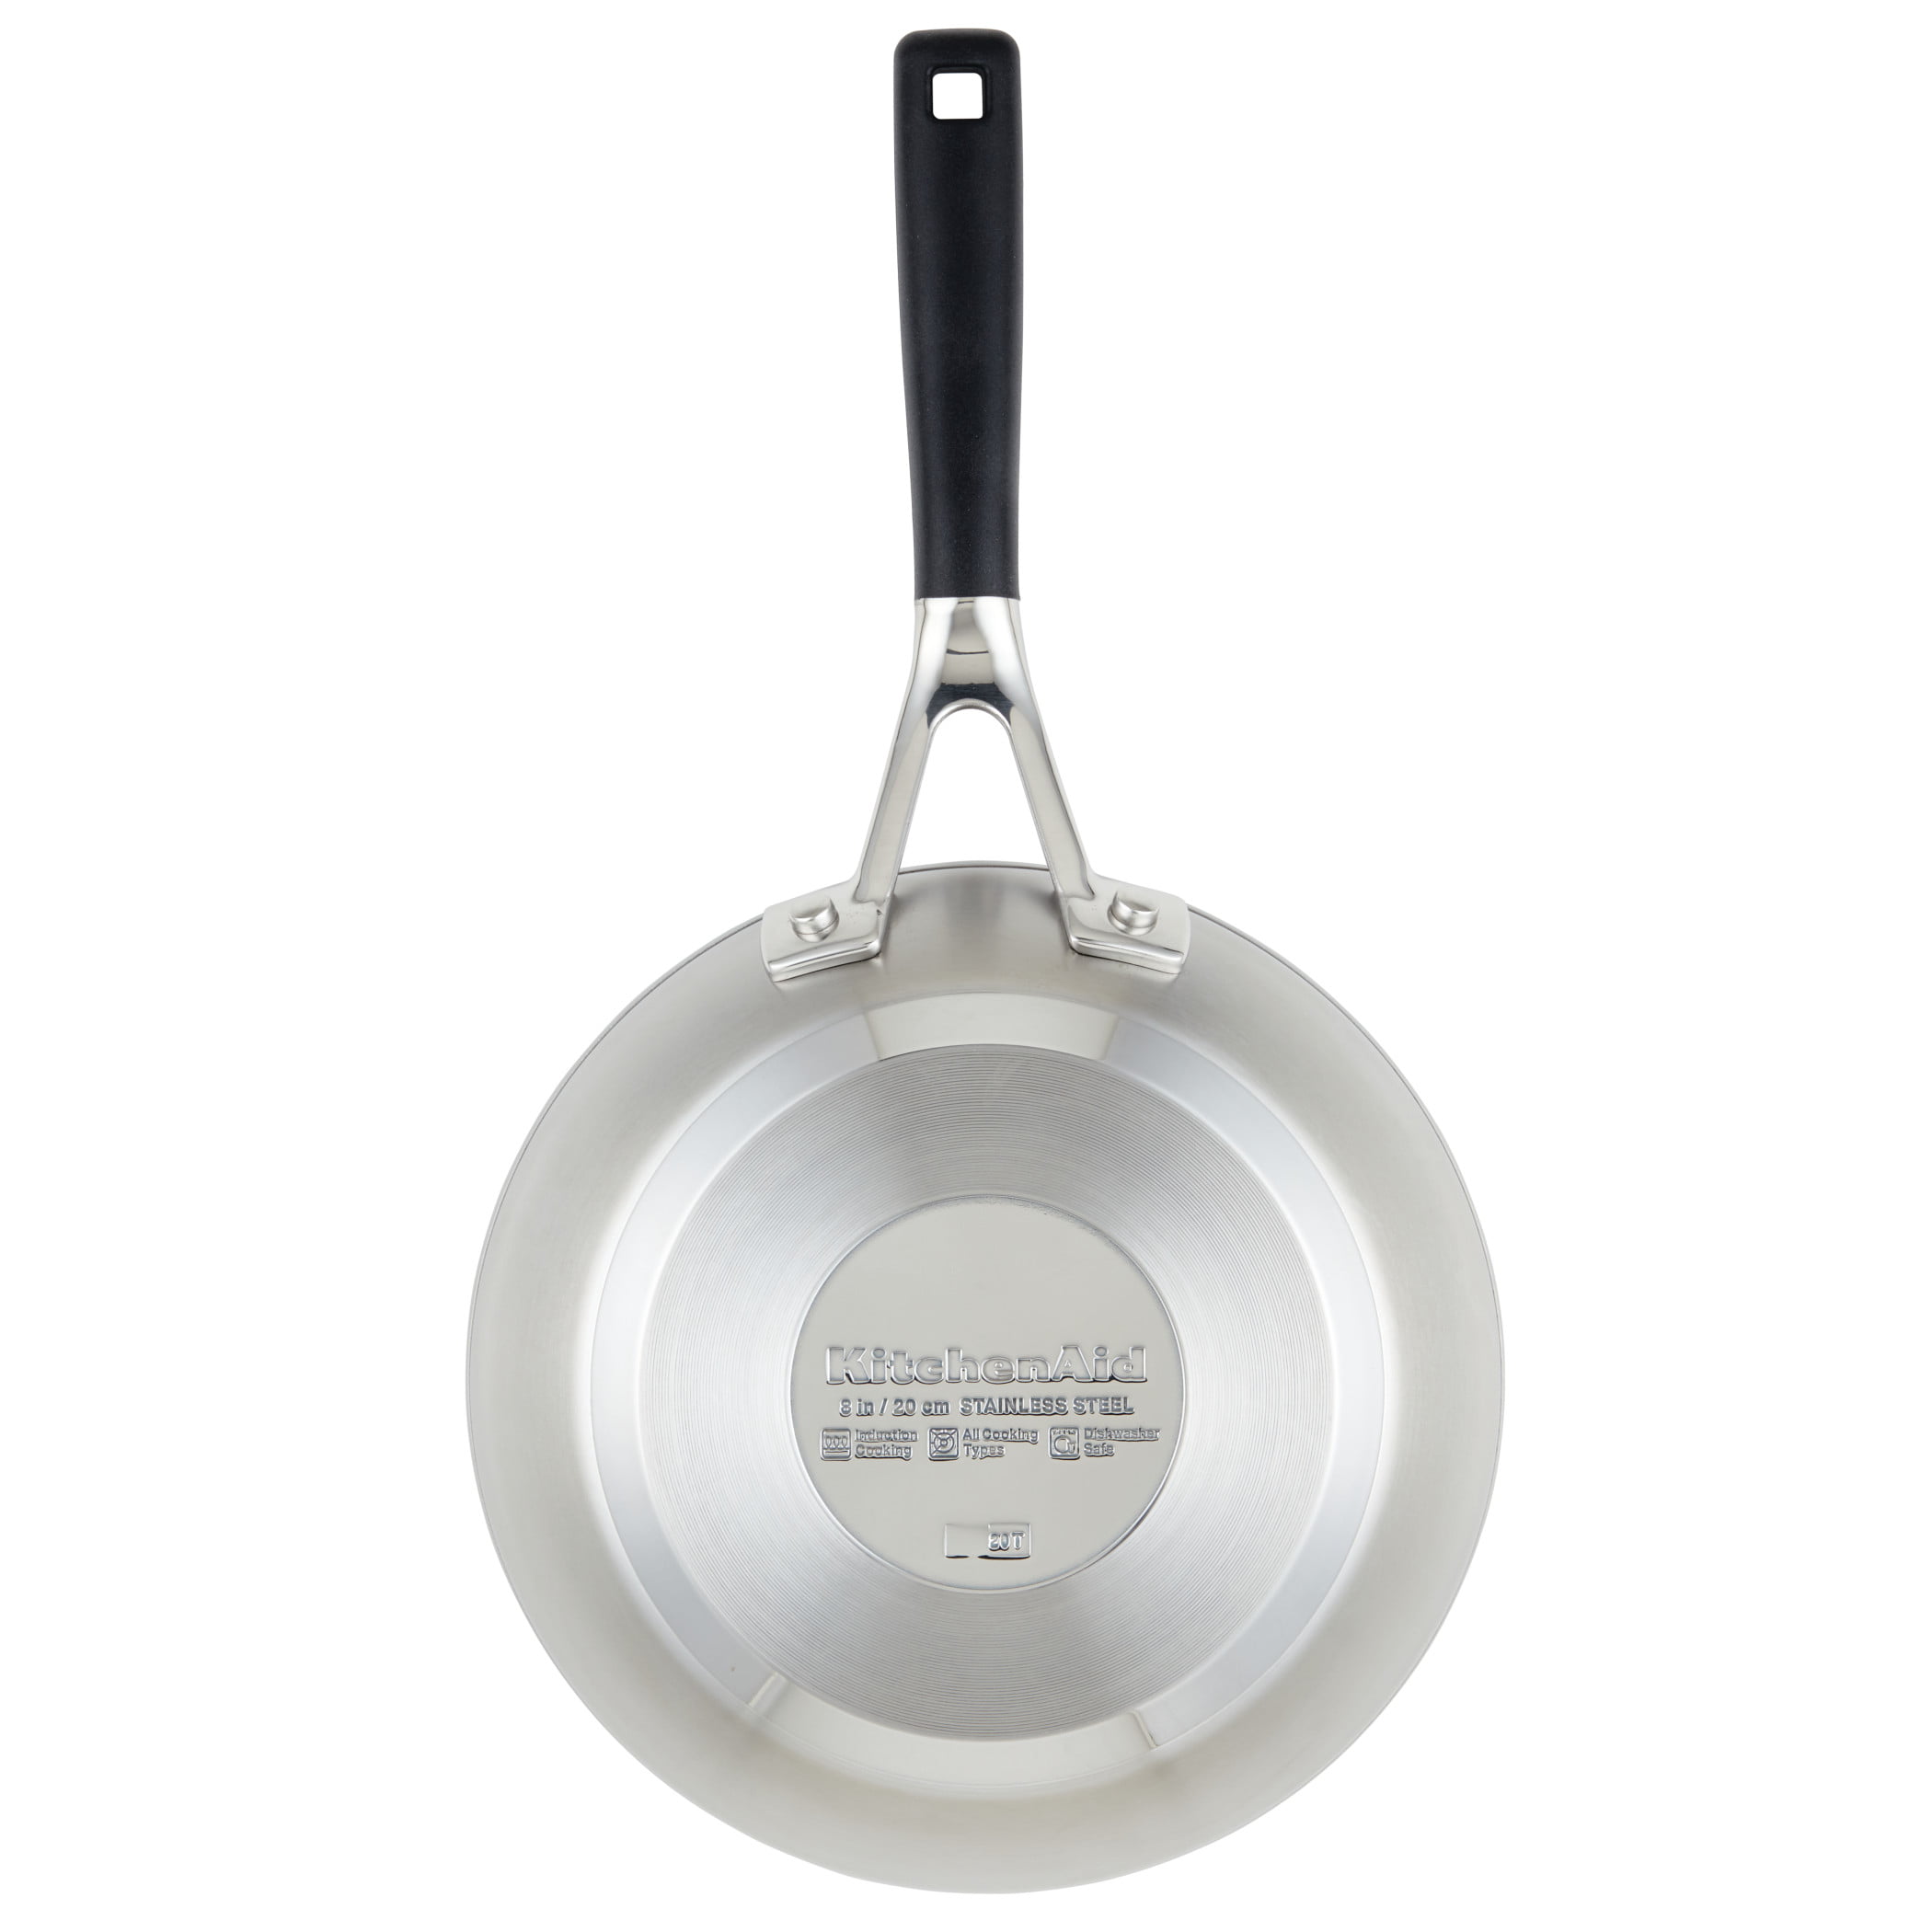 Is KitchenAid a good brand for frying pans? : r/Cooking